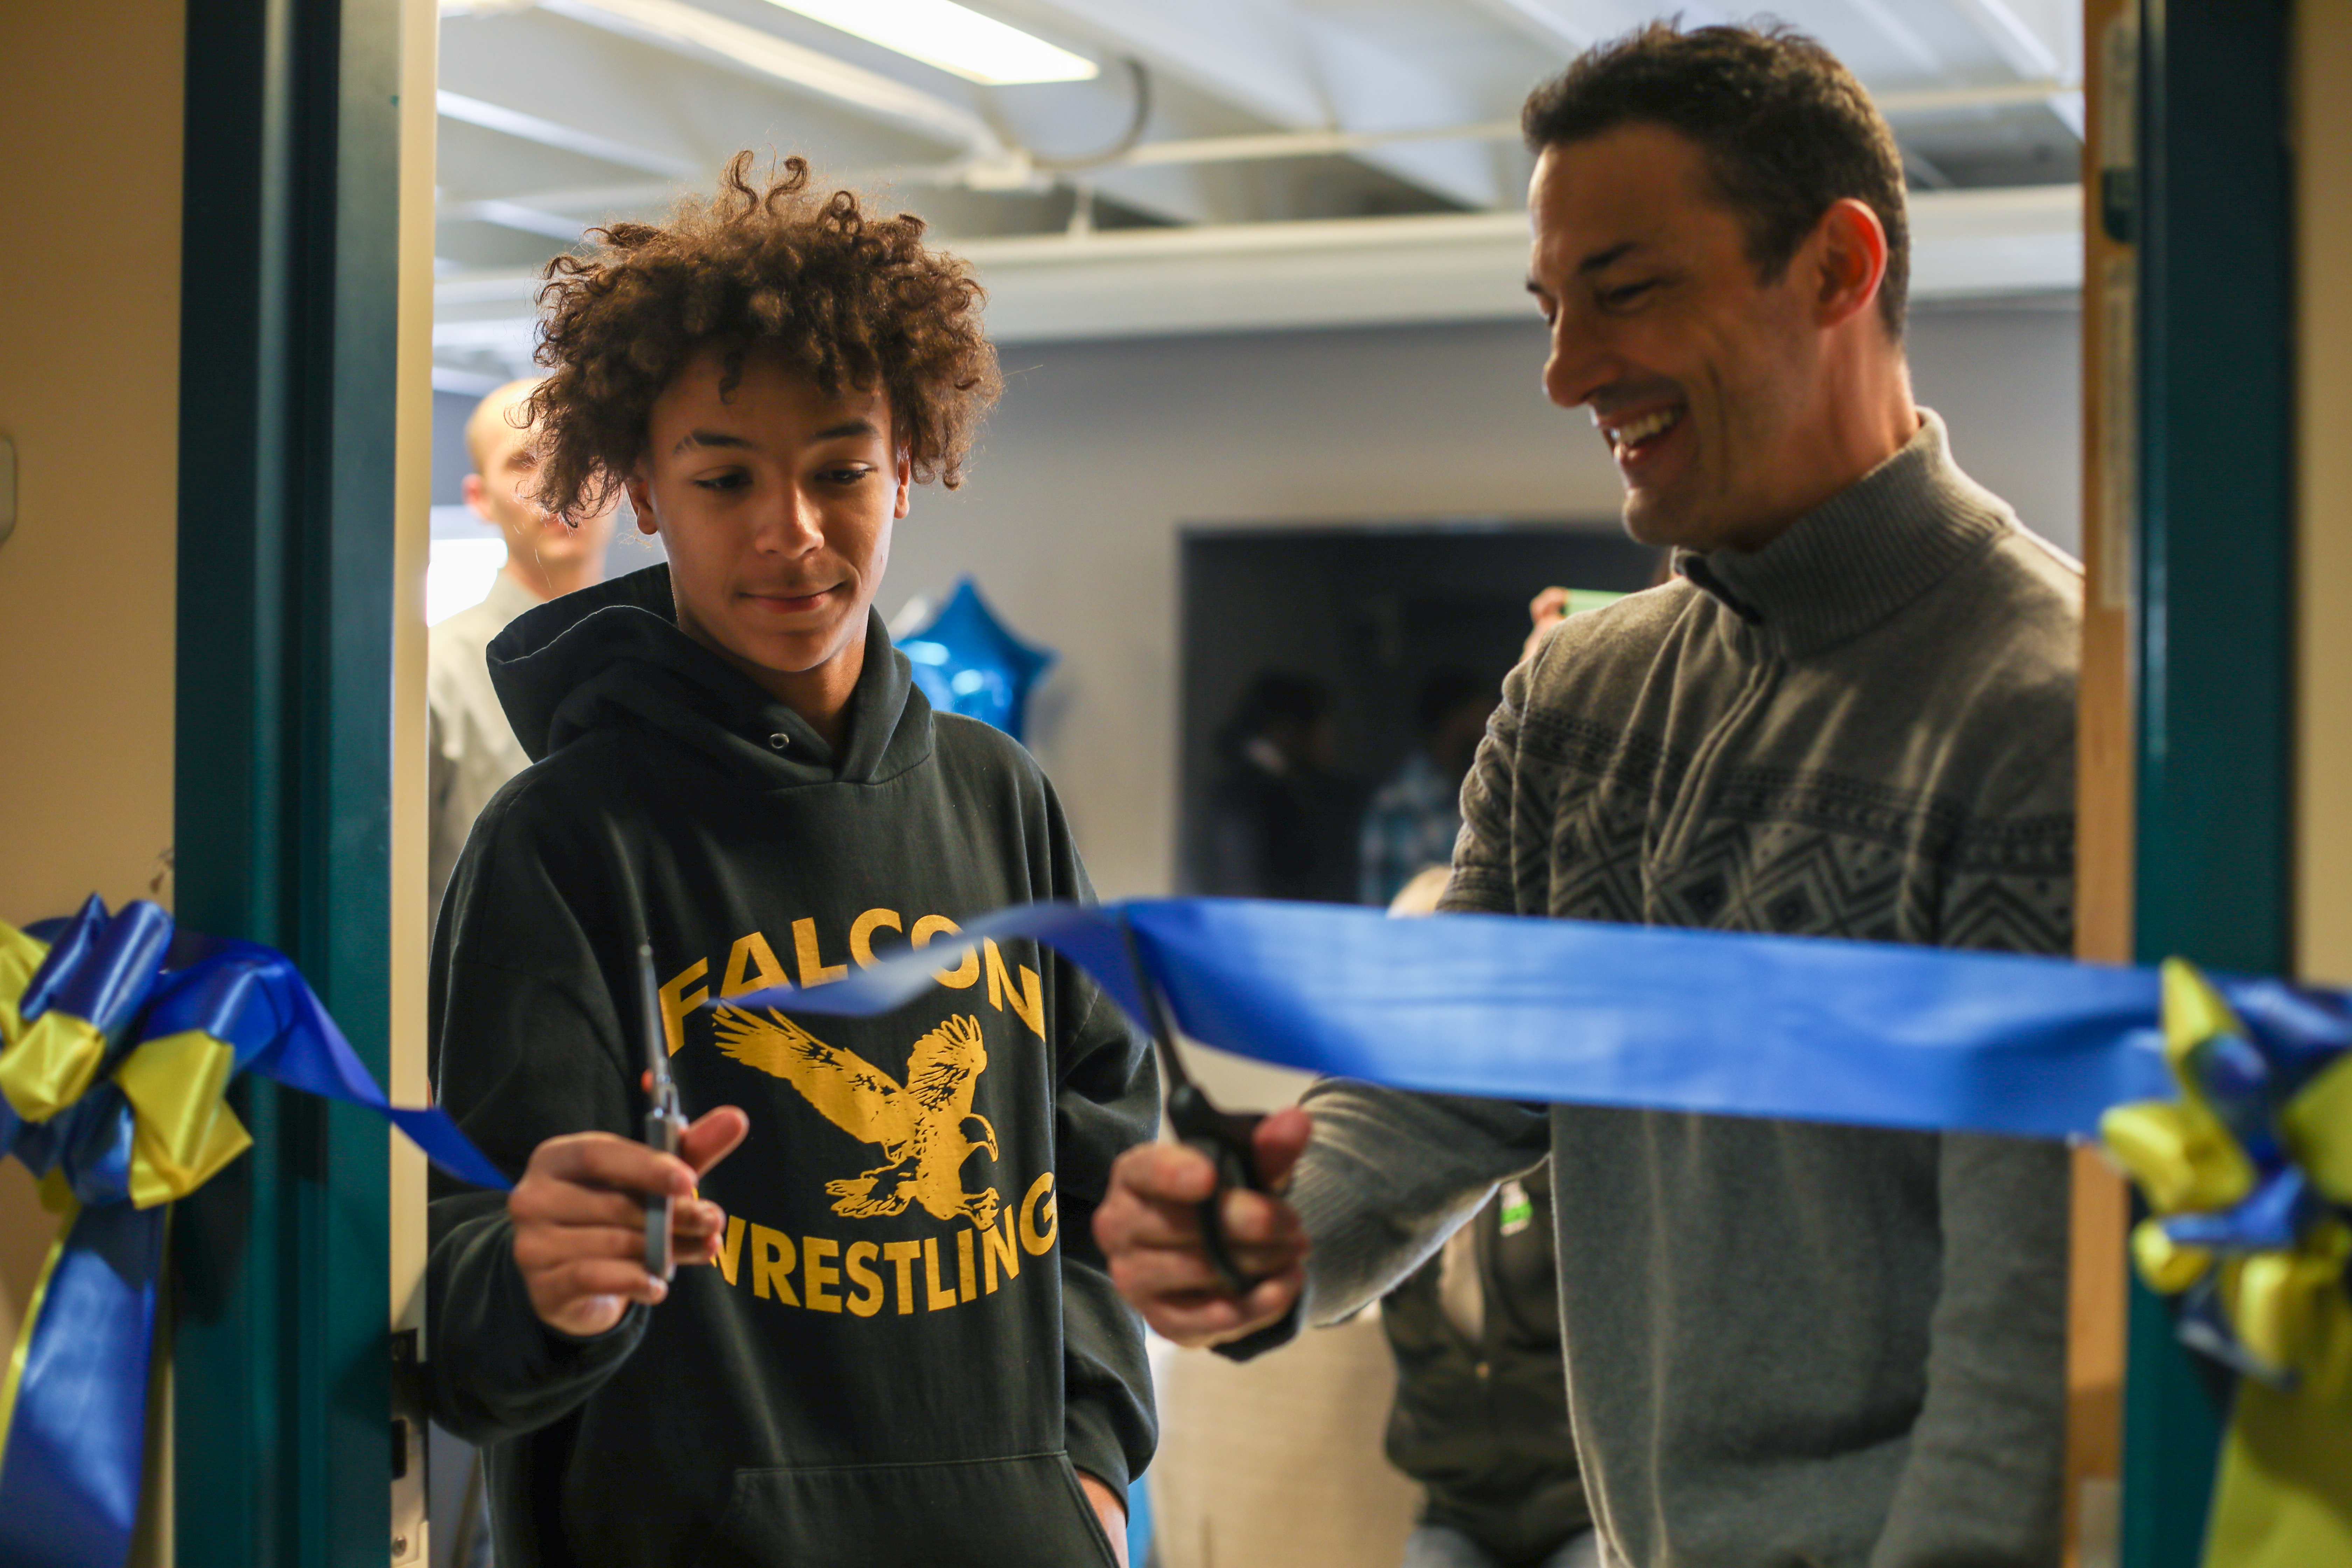 The blue ribbon was cut in a ceremony by a local teen boy accompanied by an adult while standing in the doorway to the new room.